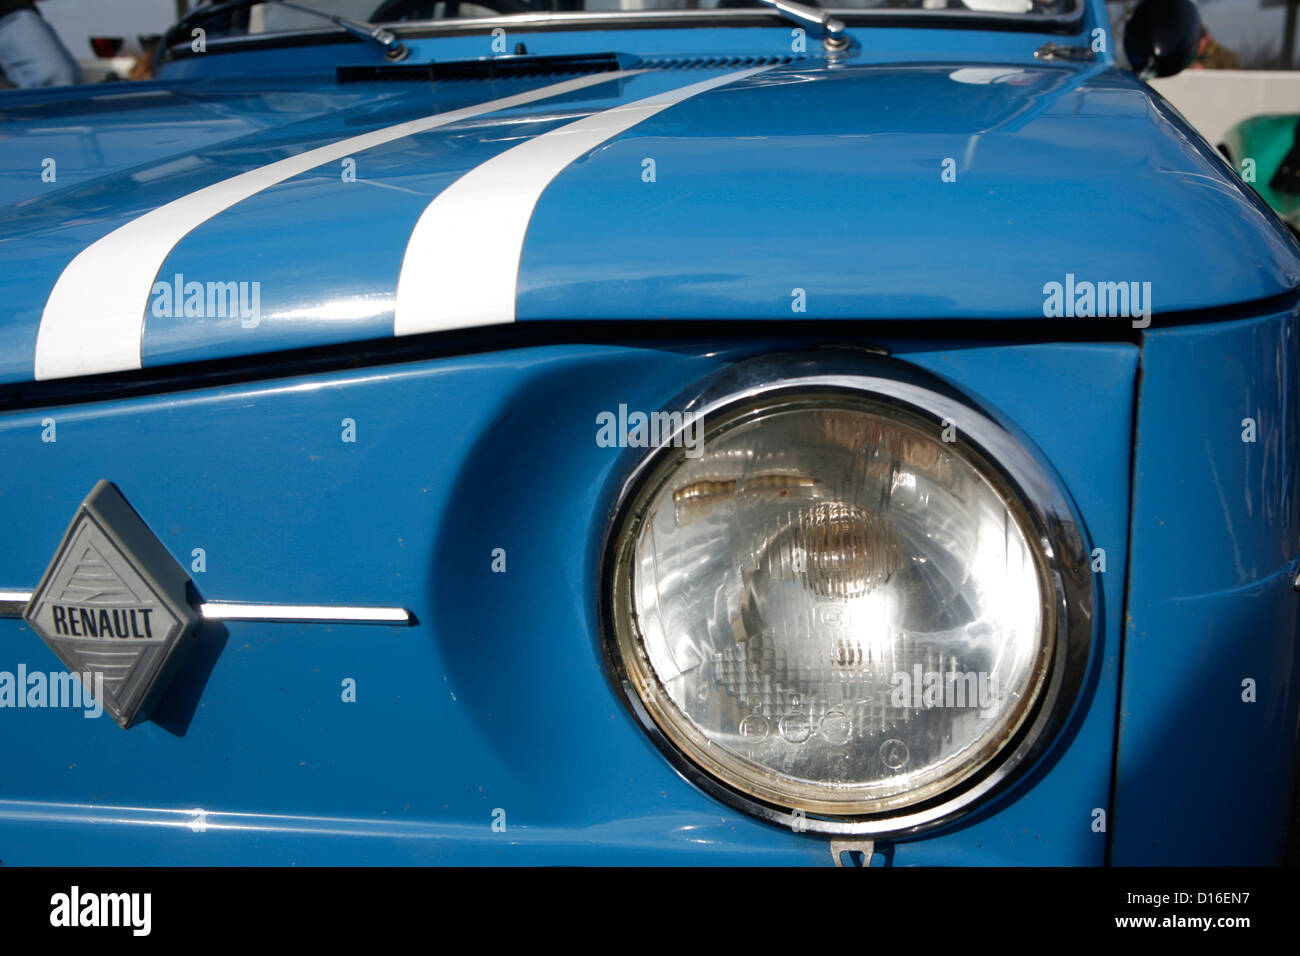 The front badge and headlight of an old Renault car. Stock Photo